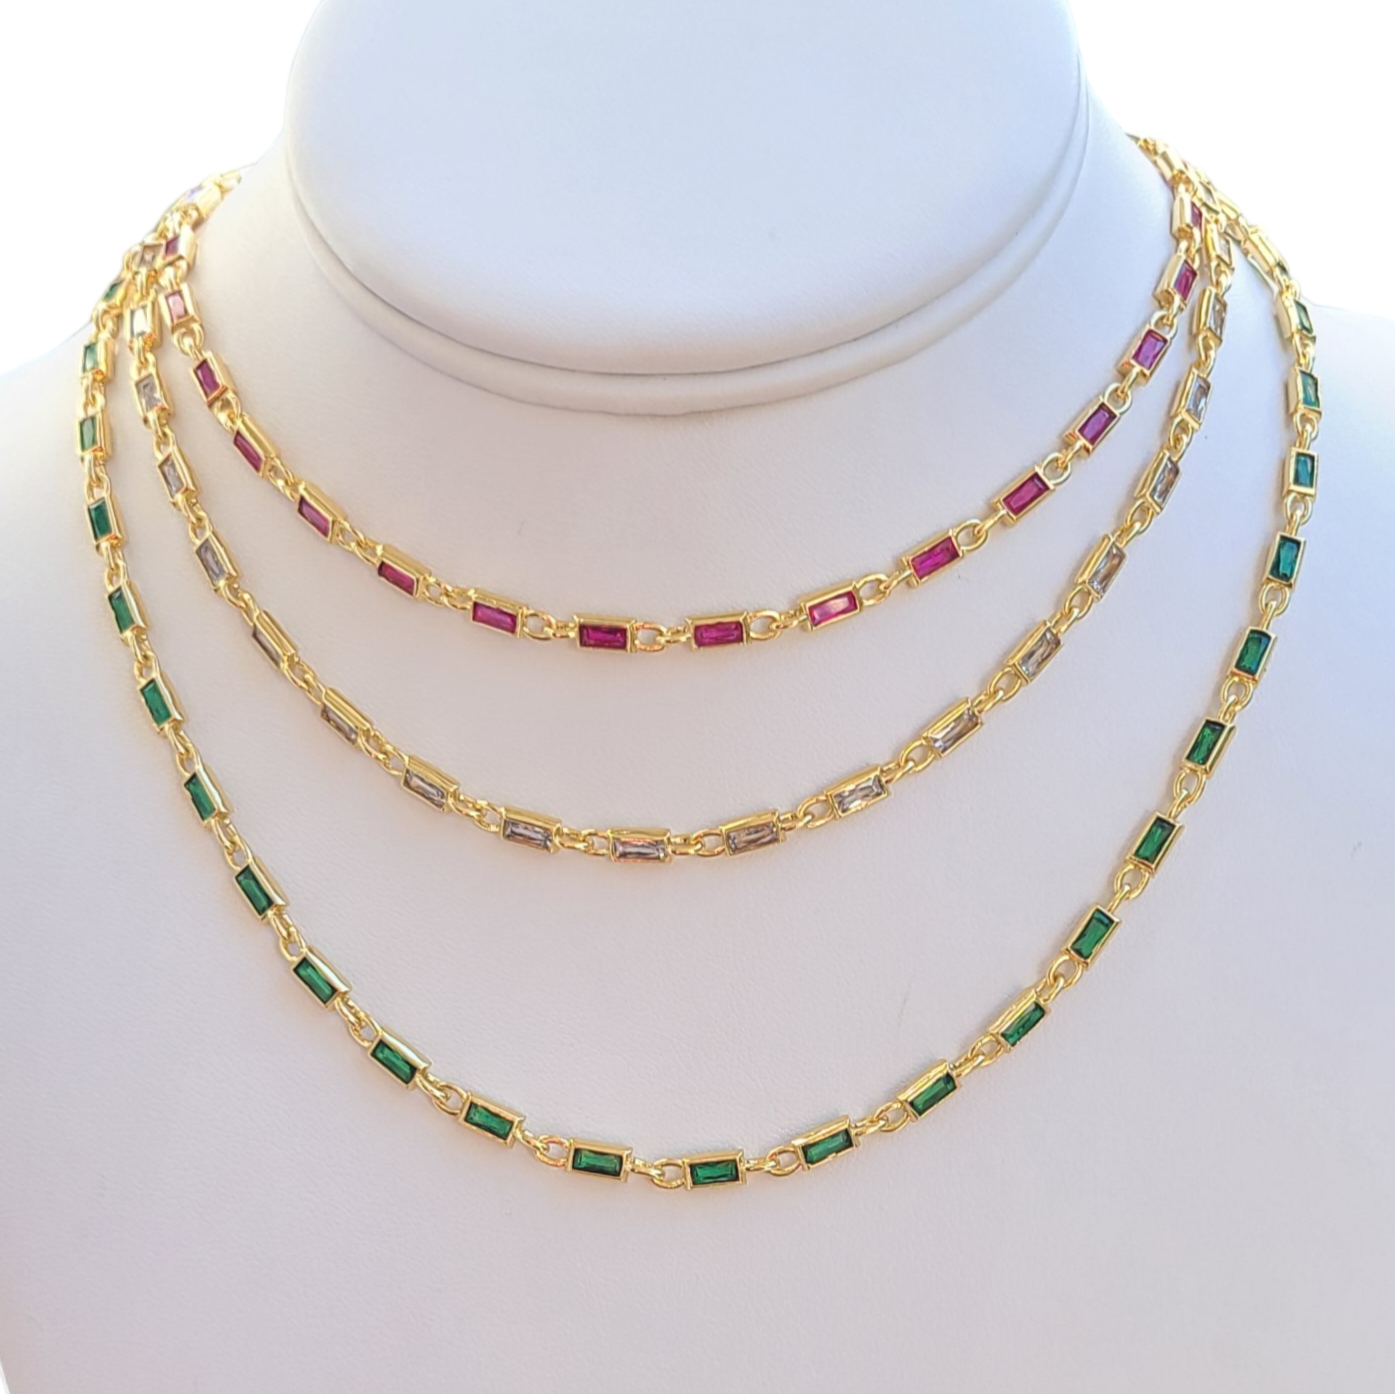 Cool Hues Necklace